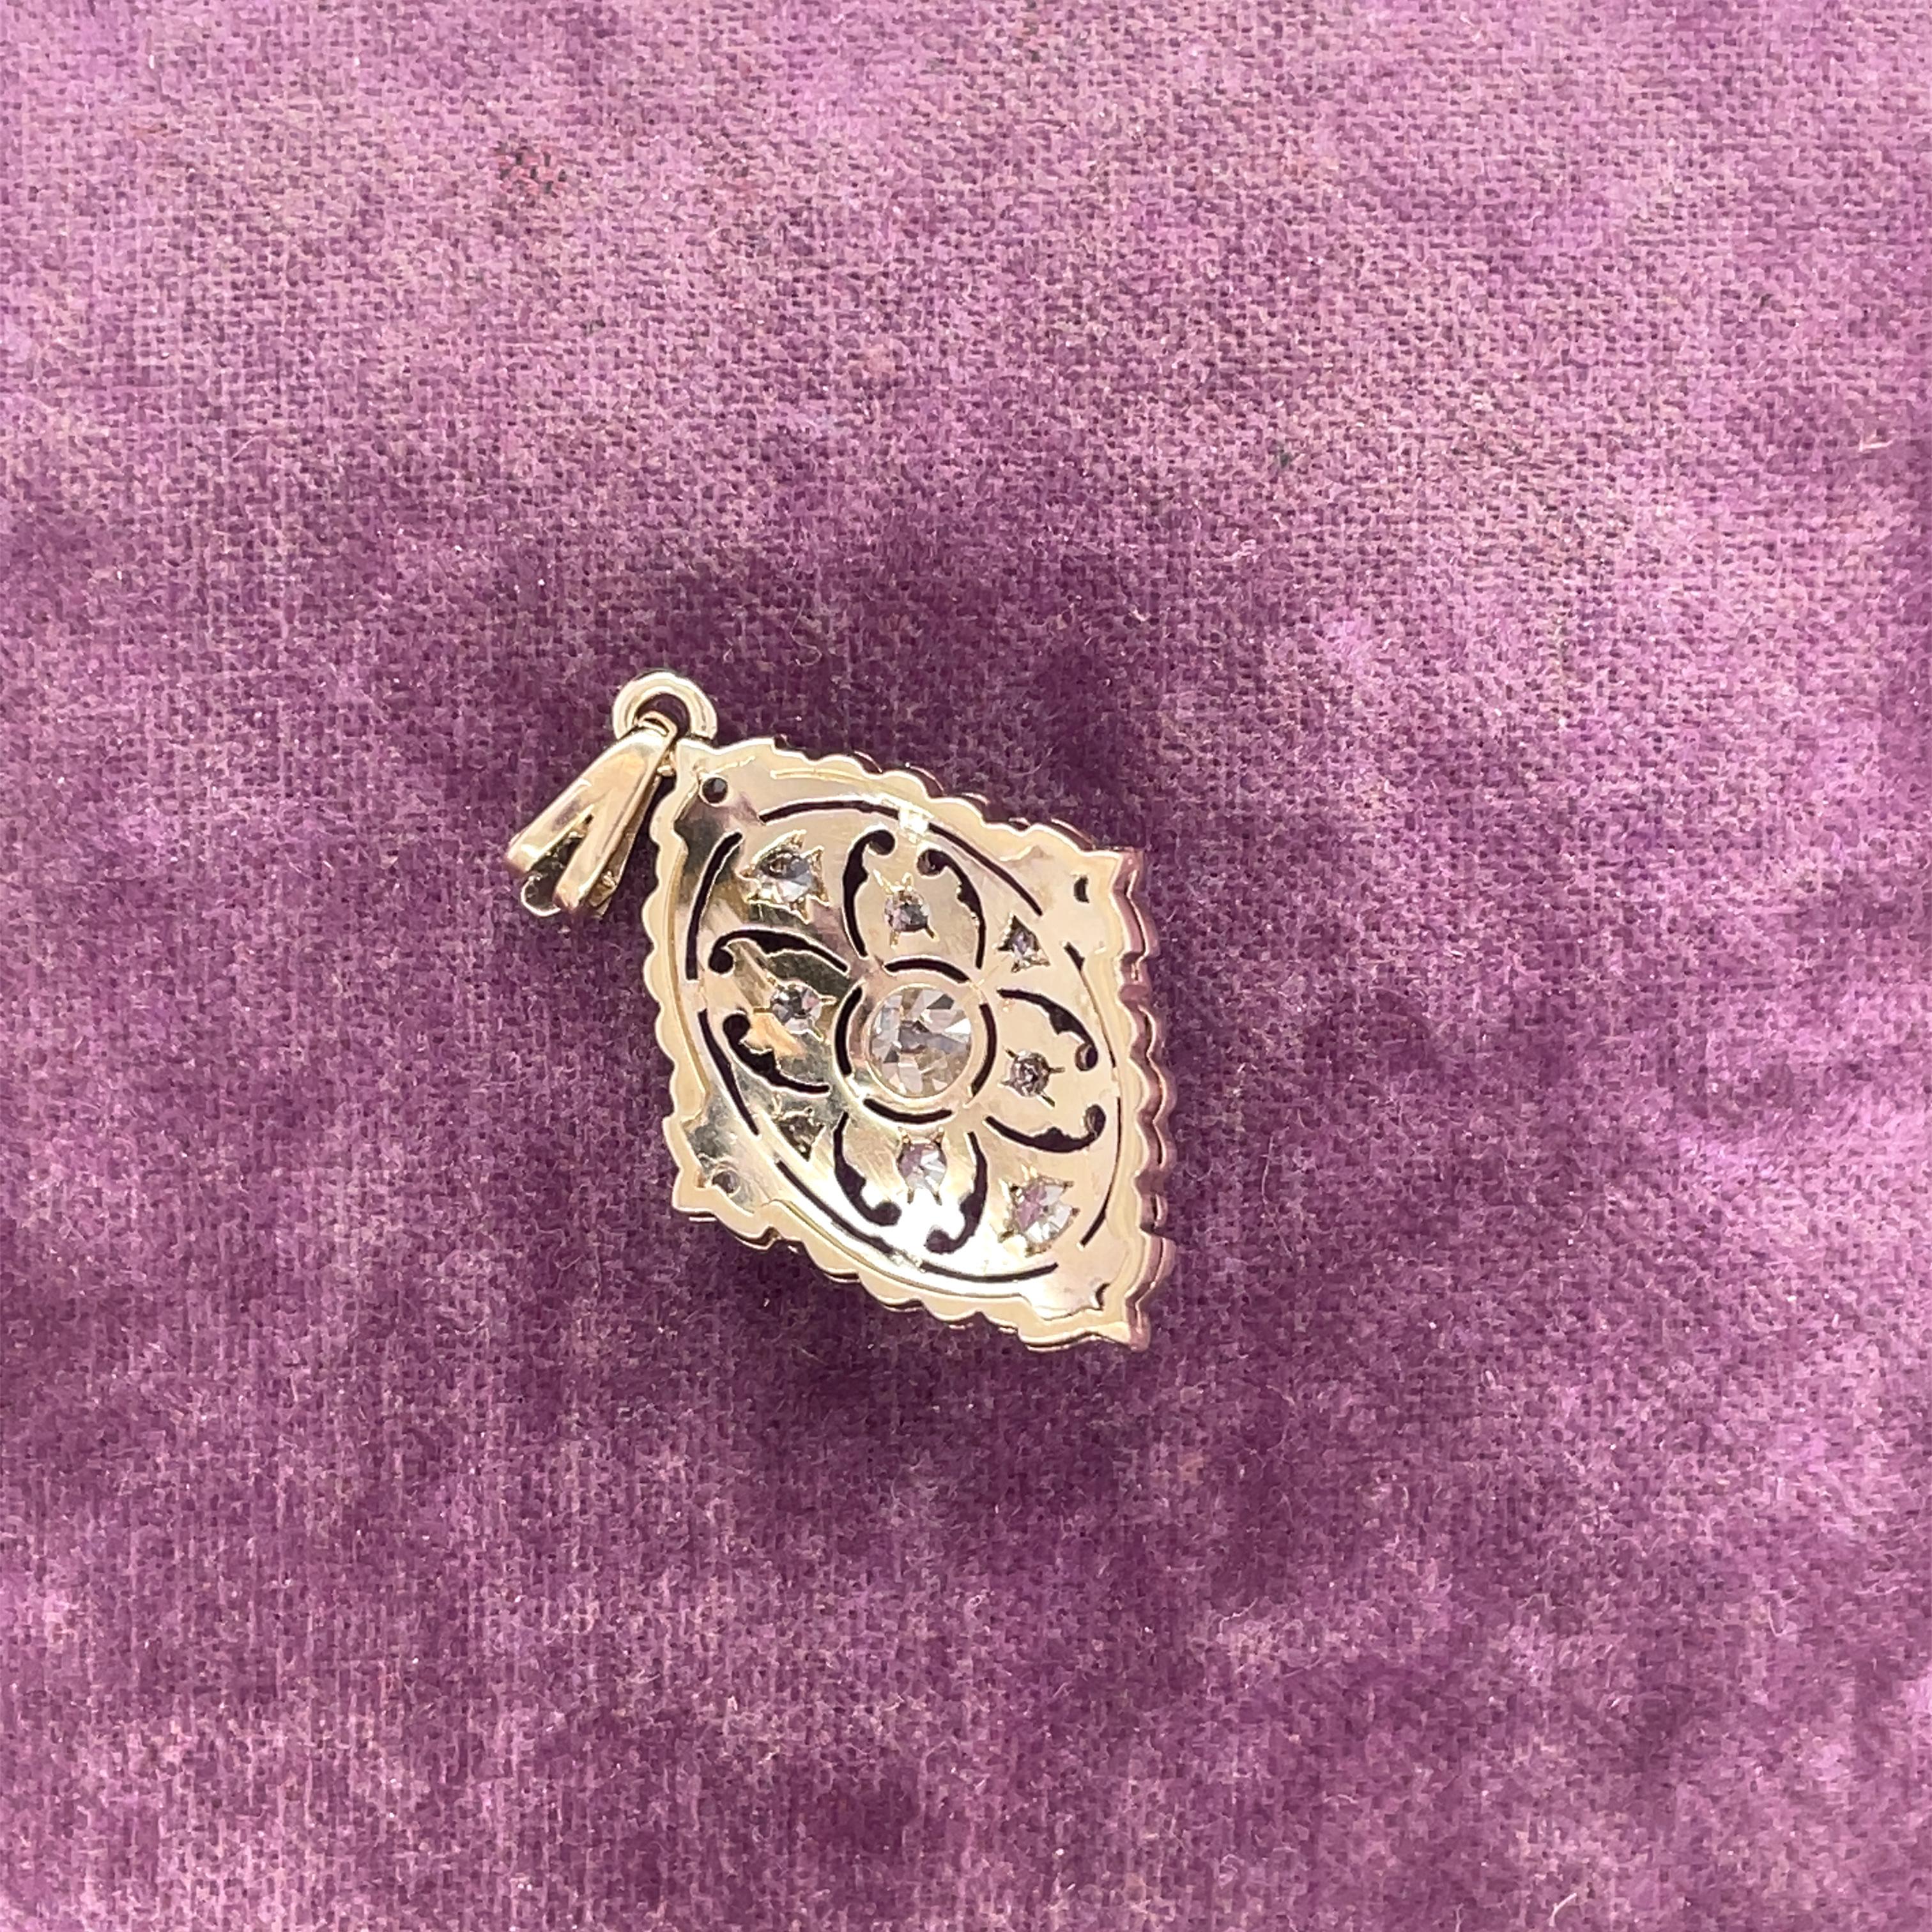 Year: 1940s

Item Details: 
Metal Type:  14k Gold [Hallmarked, and Tested]
Weight:  3.0 grams

Diamond Details:
Weight: .50ct, total weight
Cut: Old European brilliant
Color: H
Clarity: VS

Pendant Measurement: 1.20 inches x .70 inches
Condition: 